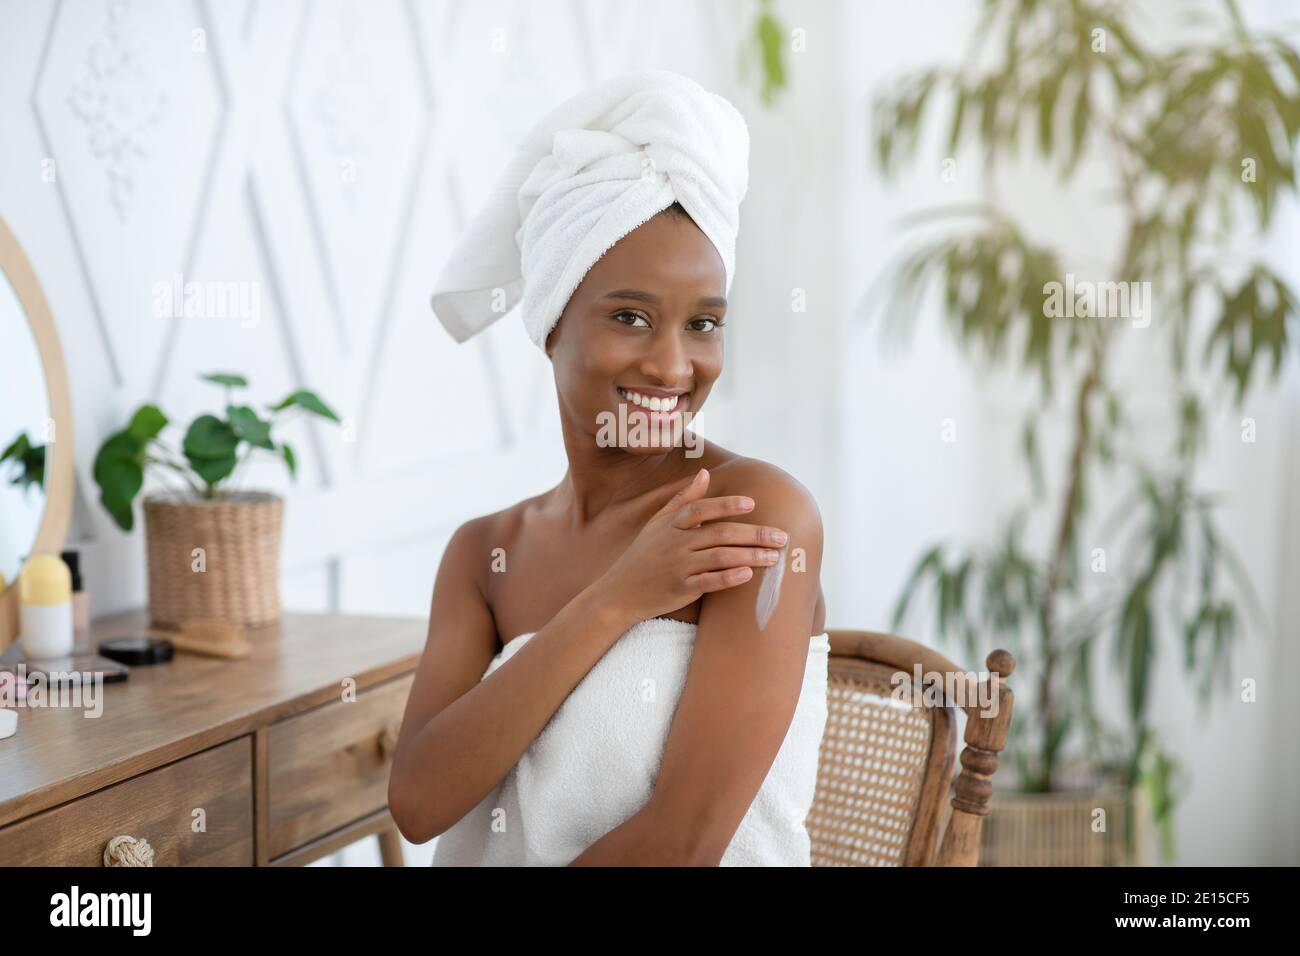 Routine care of skin and moisturizing after shower at home during covid-19 pandemic Stock Photo